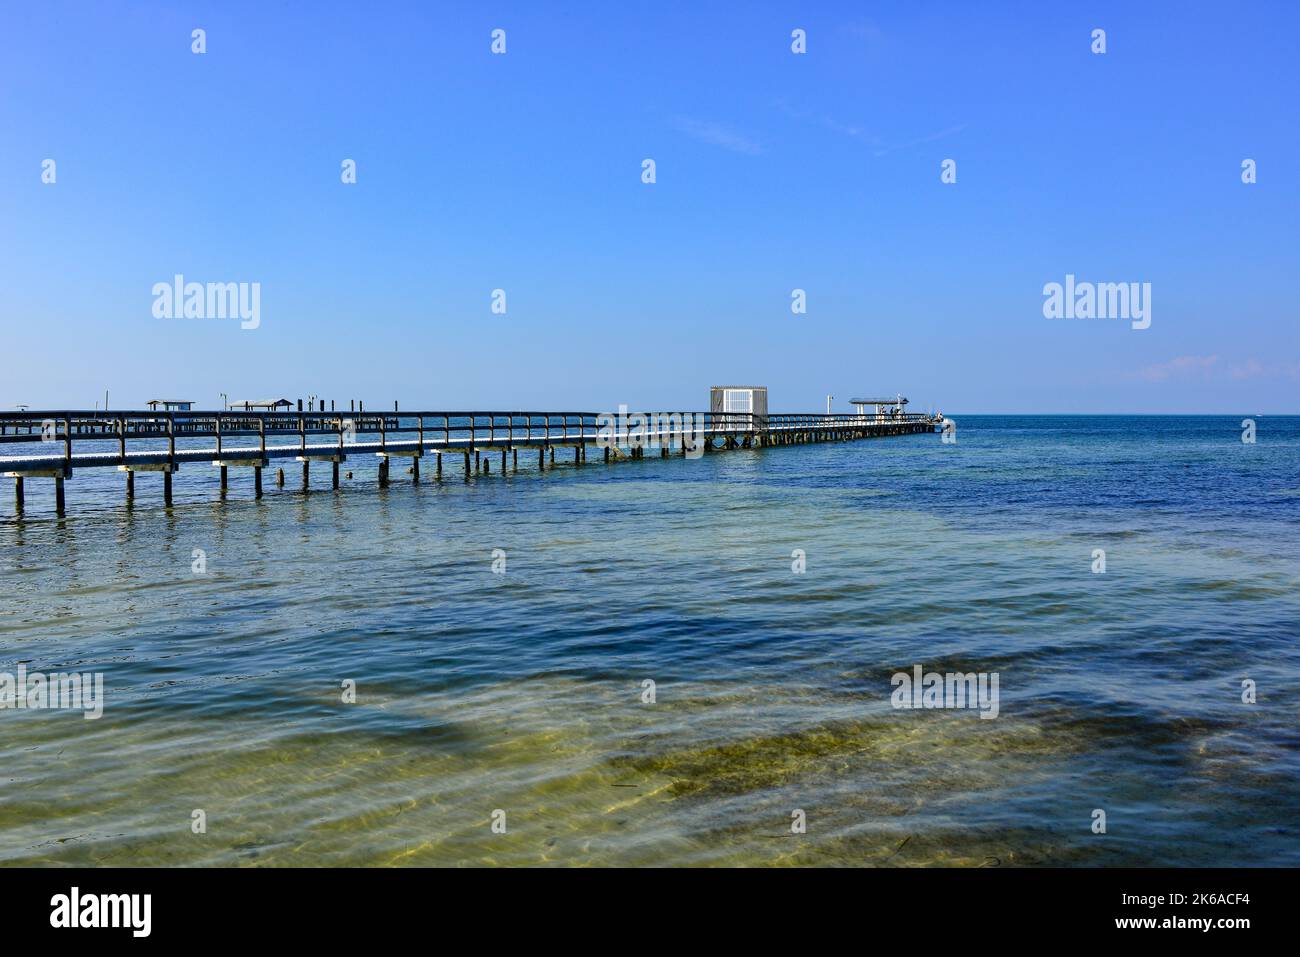 Brackish water in Charlotte Harbor with fishing piers and docks extending into the minimal landscape of water with blue sky, Bokeelia, Pine Island, FL Stock Photo